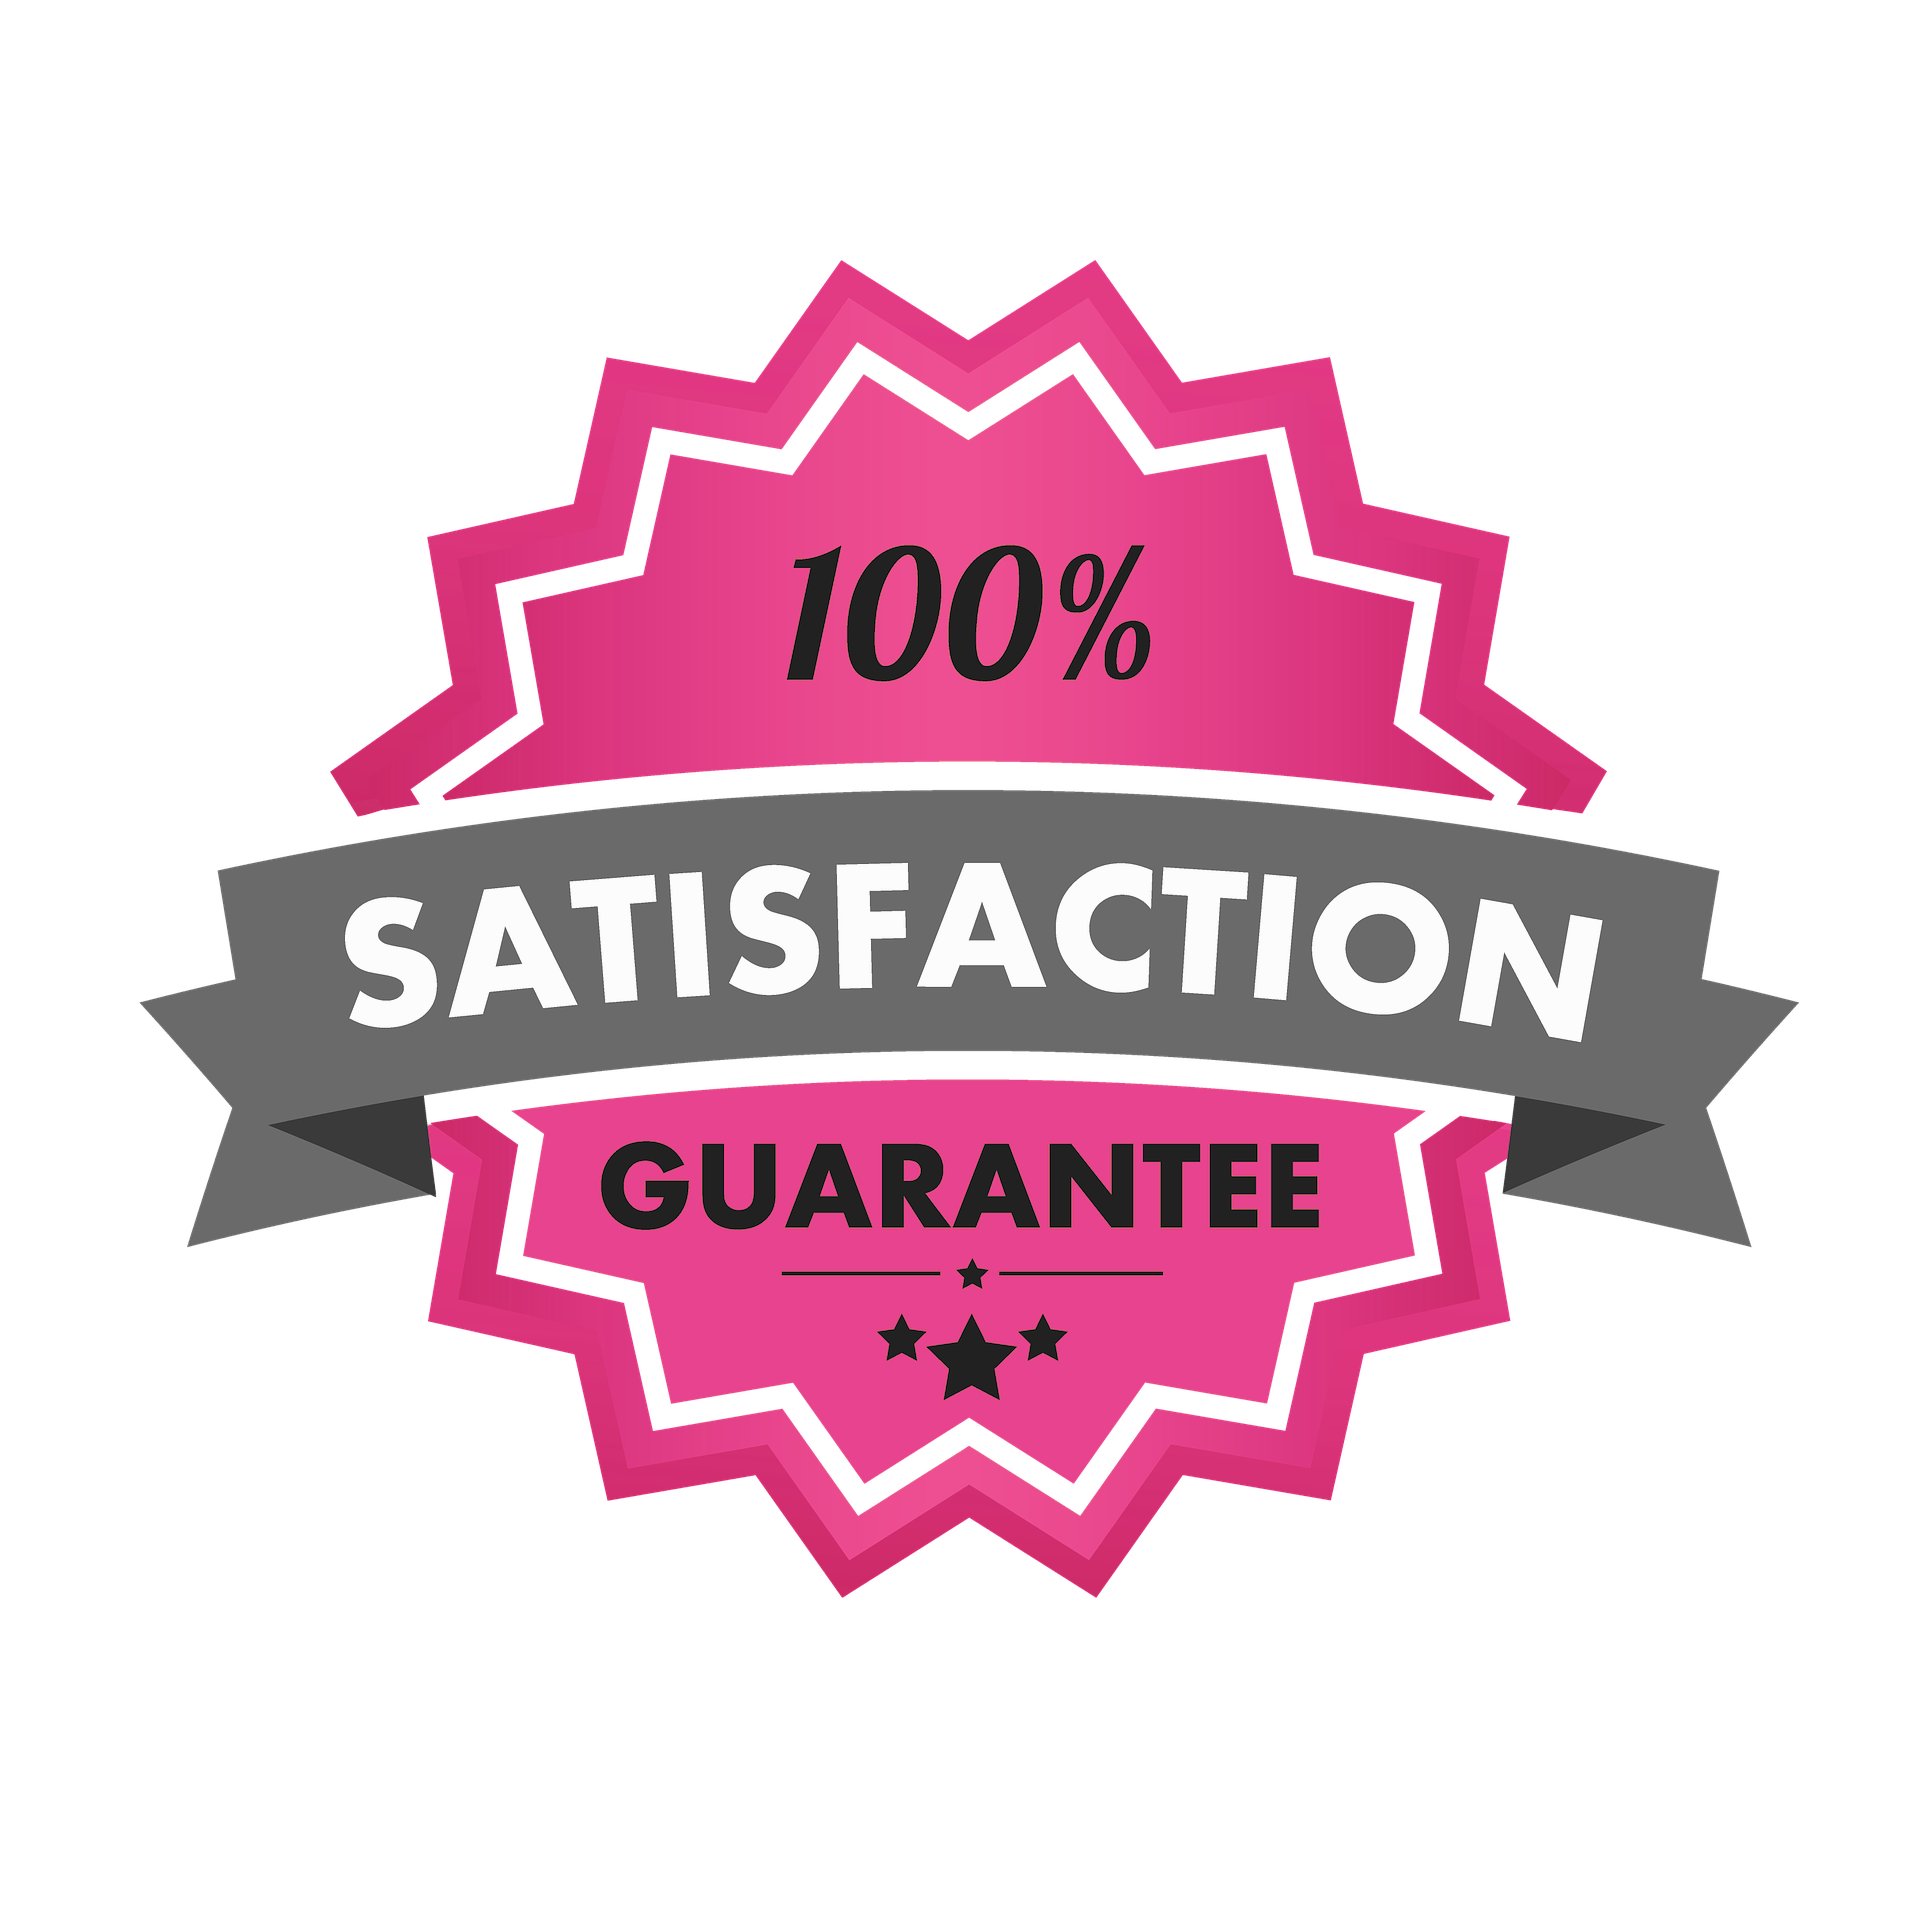 We Care About Your Satisfaction